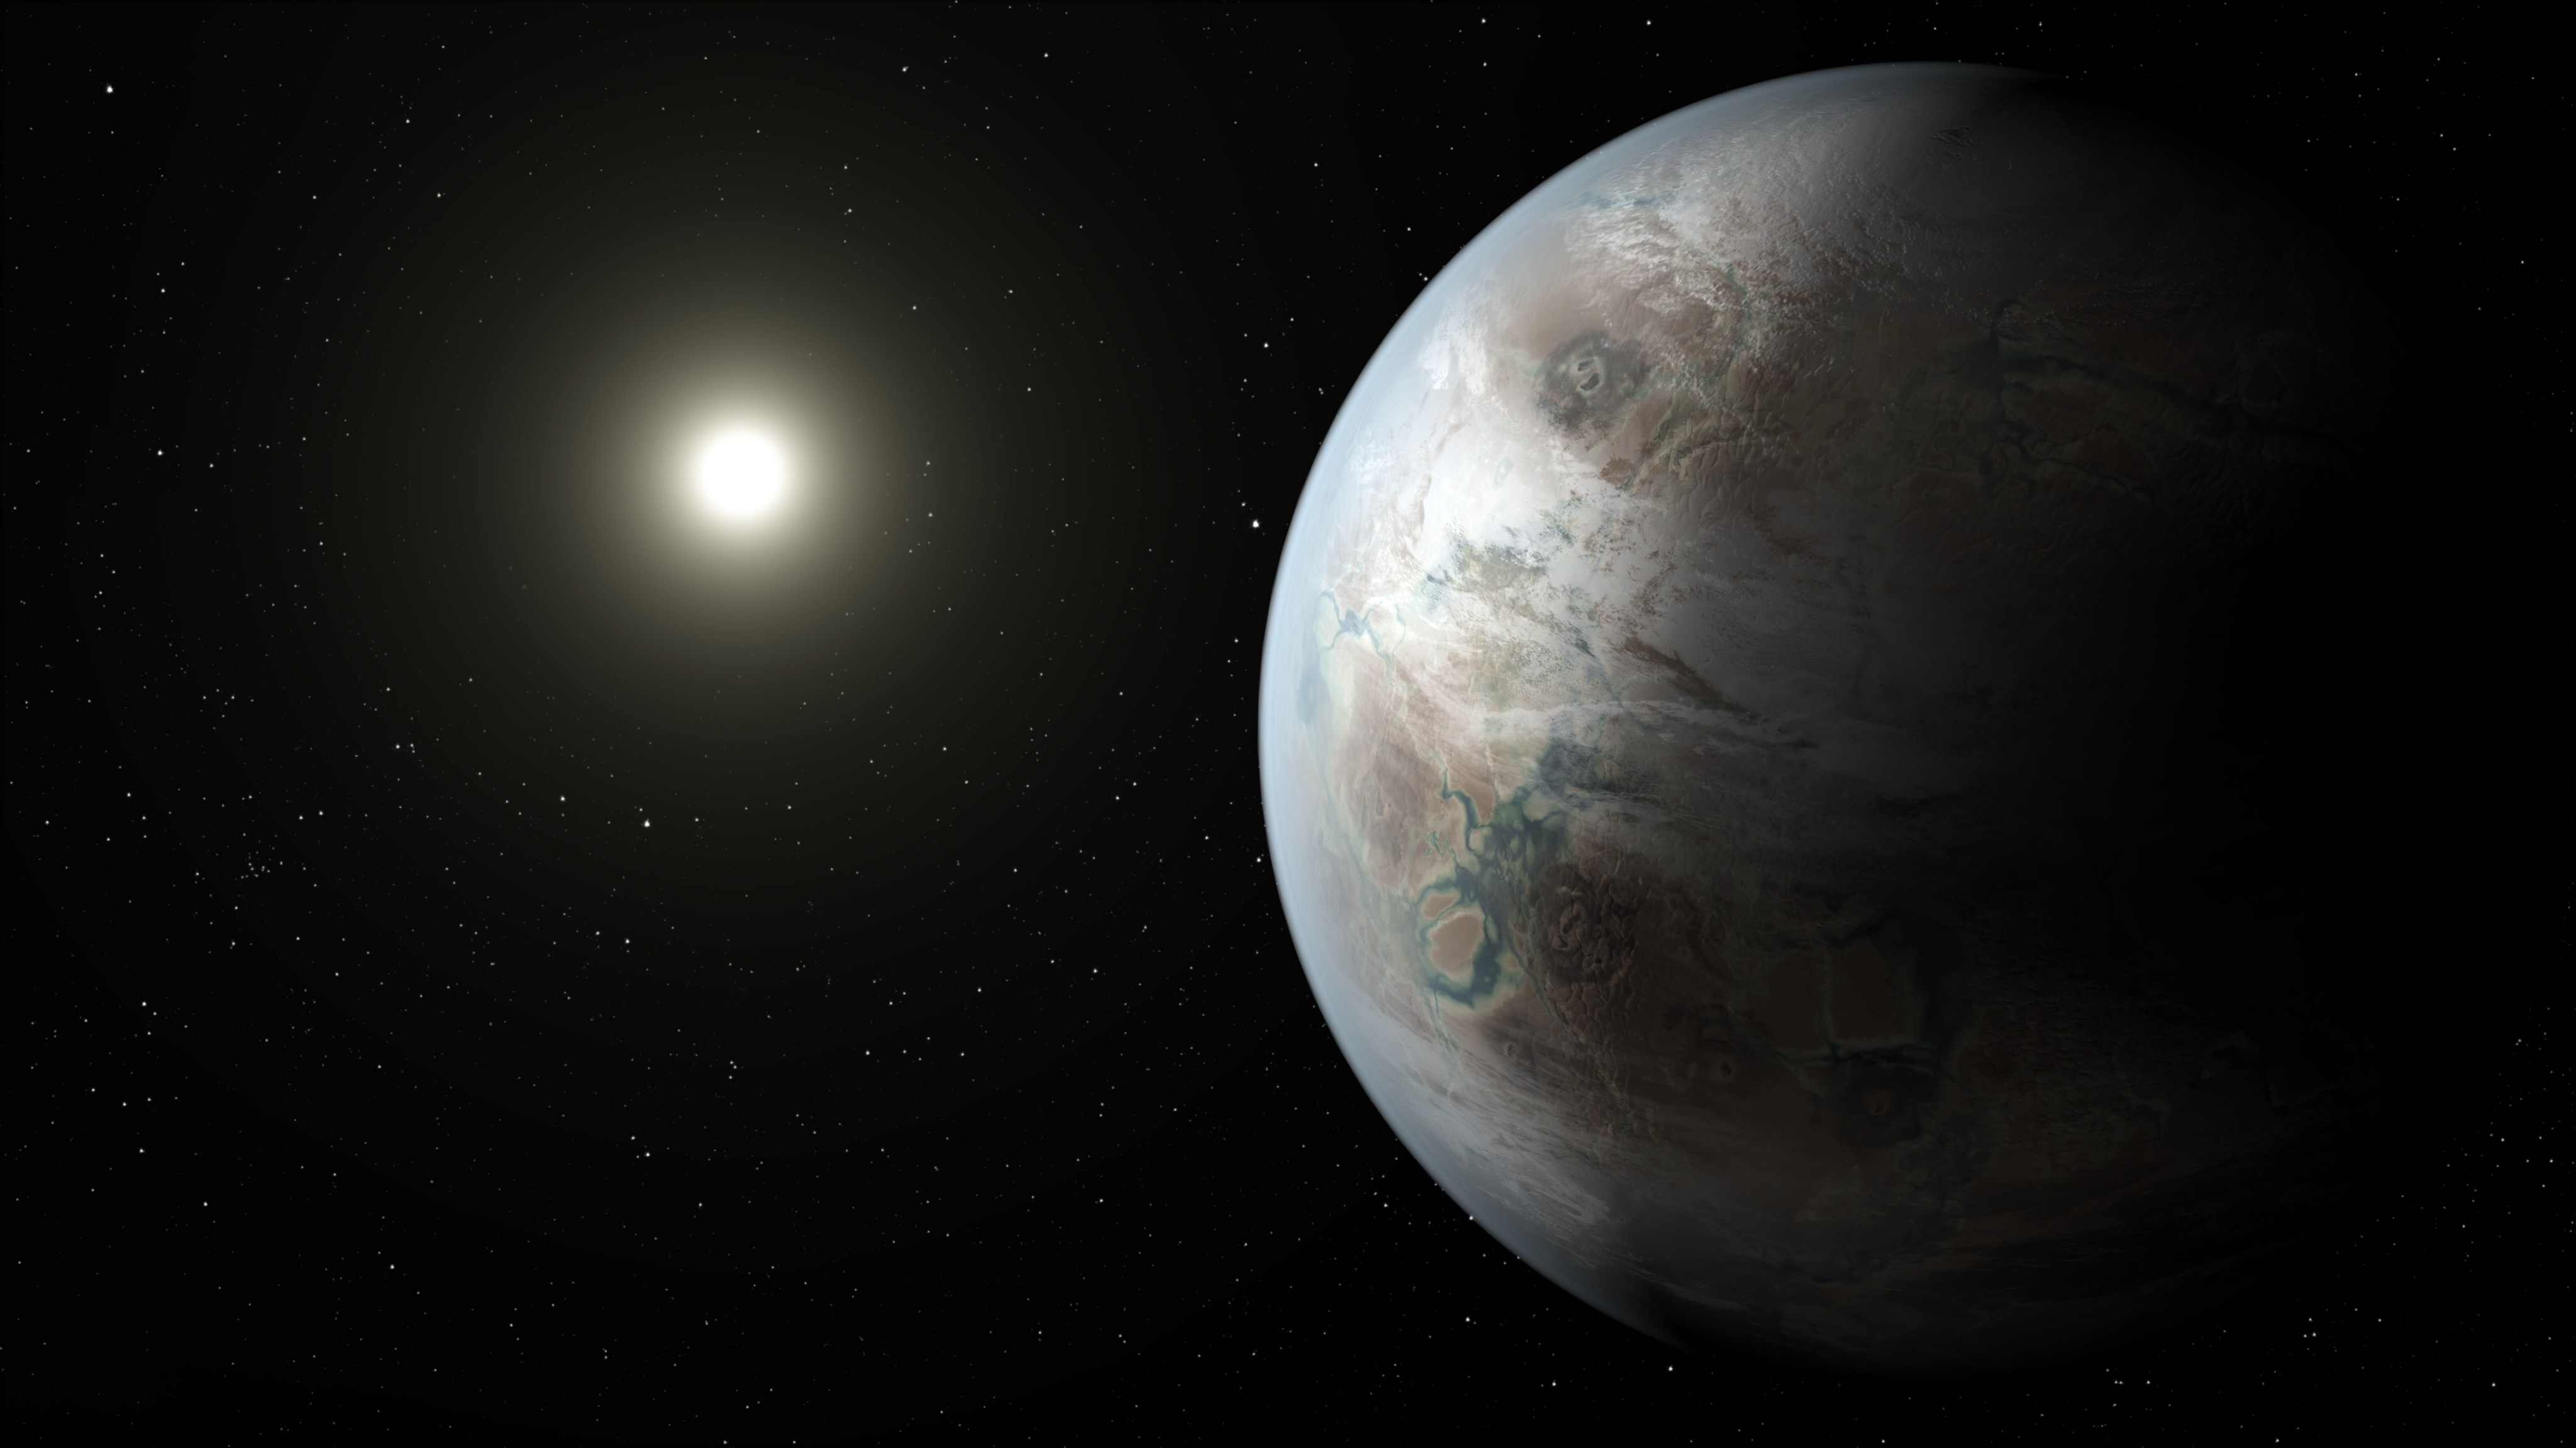 An exoplanet in space is shown, with its host star in the distance. The planet displays a rocky surface, with ice, clouds, water, and an atmosphere.